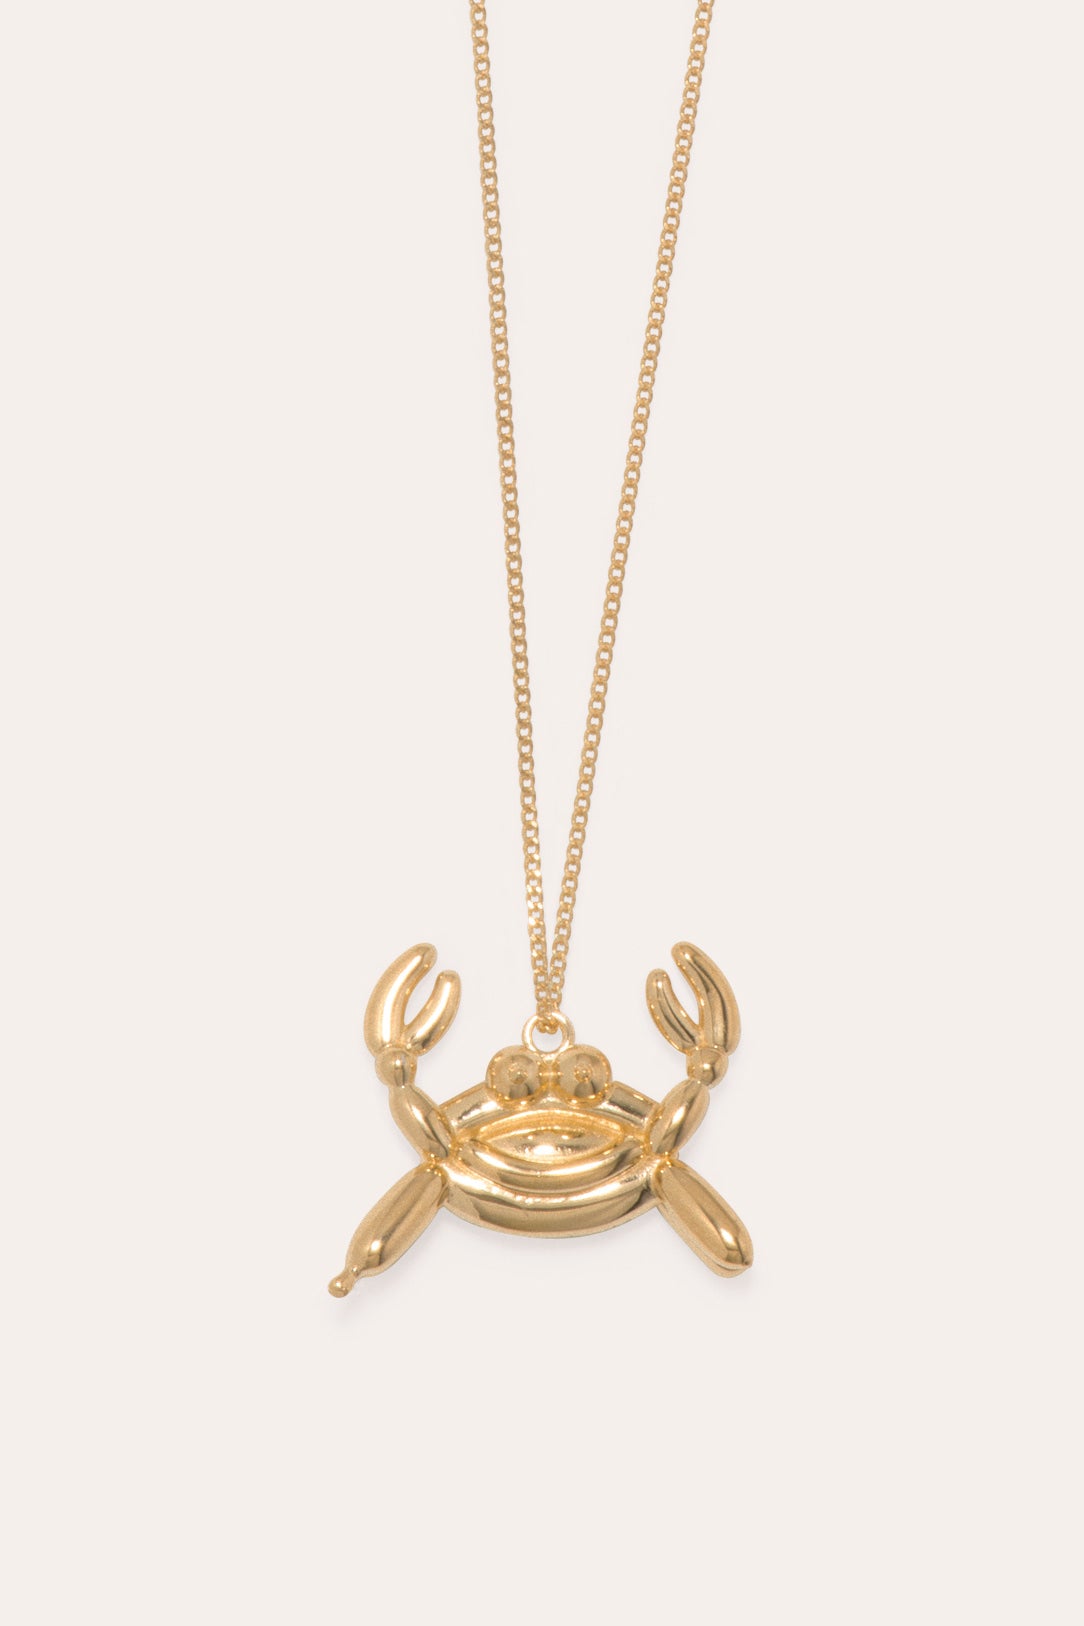 Completed Works | Zodiac Balloon Pendant - Gold